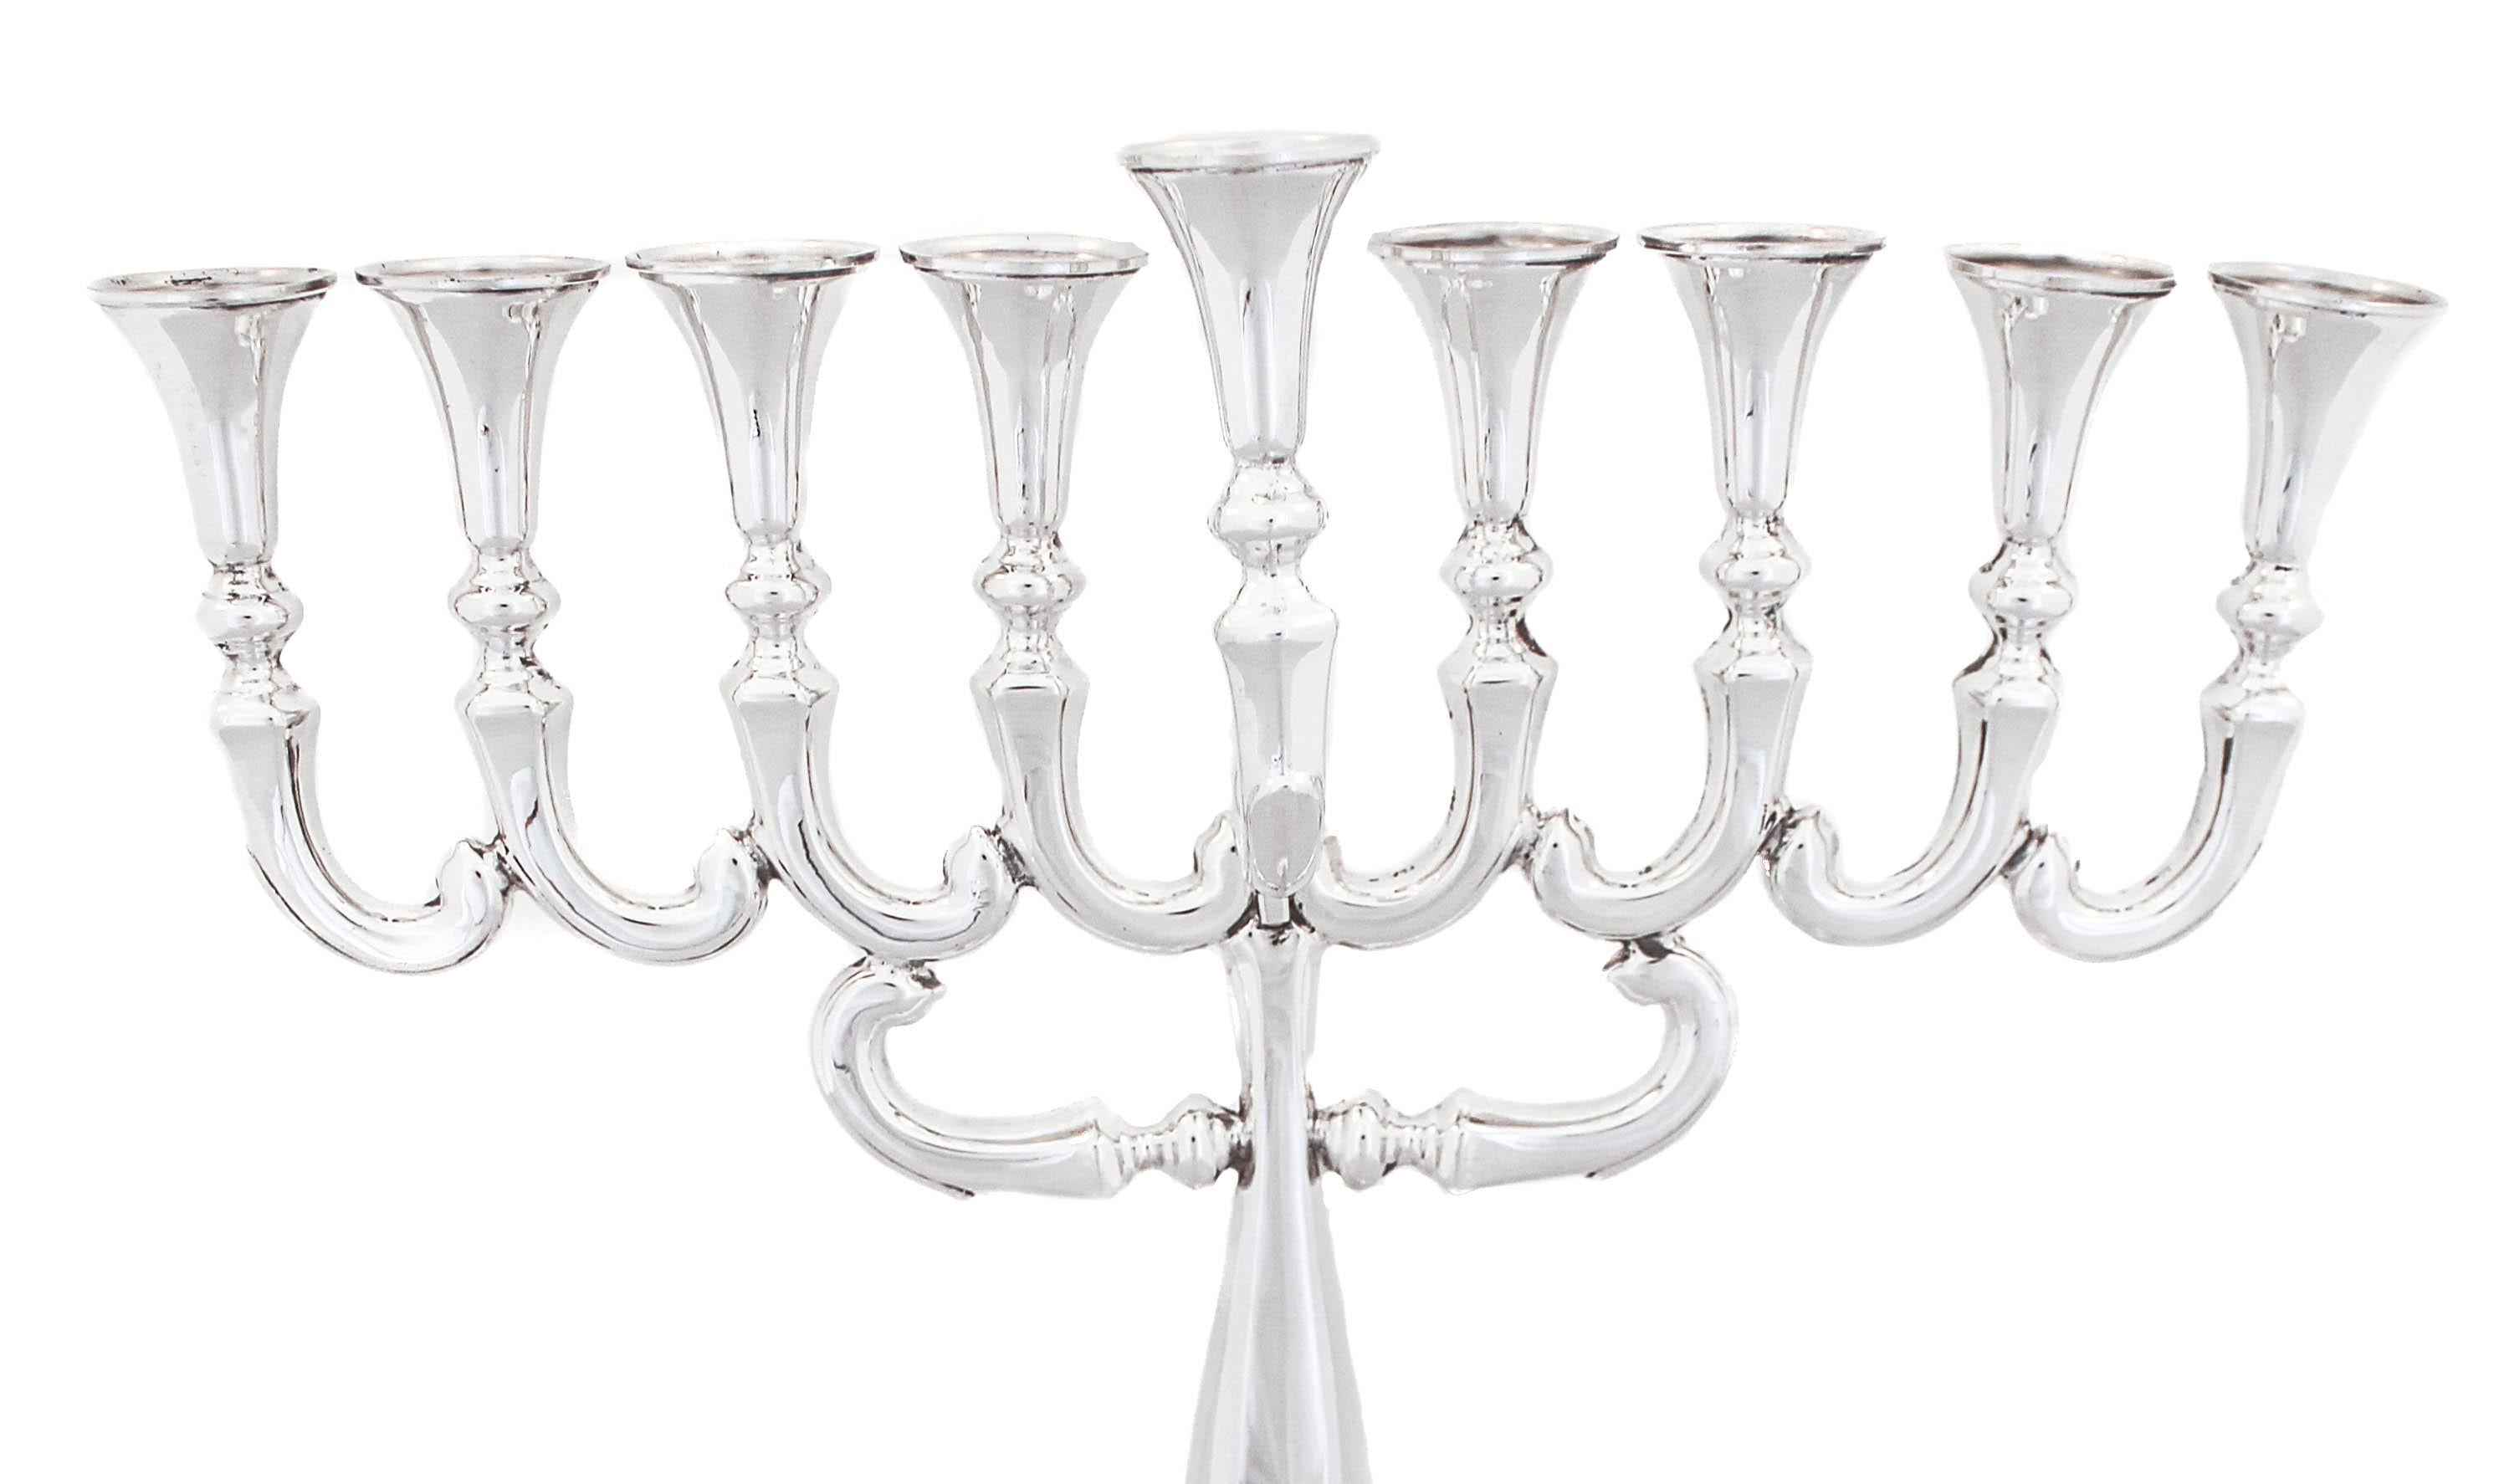 Being offered is a sterling silver menorah made in Israel.  It has a sleek and modern look with a more traditional shape.  The pedestal has a marquee shape while the arms (branches) connect to each other in a curved shape design.  The shamash is